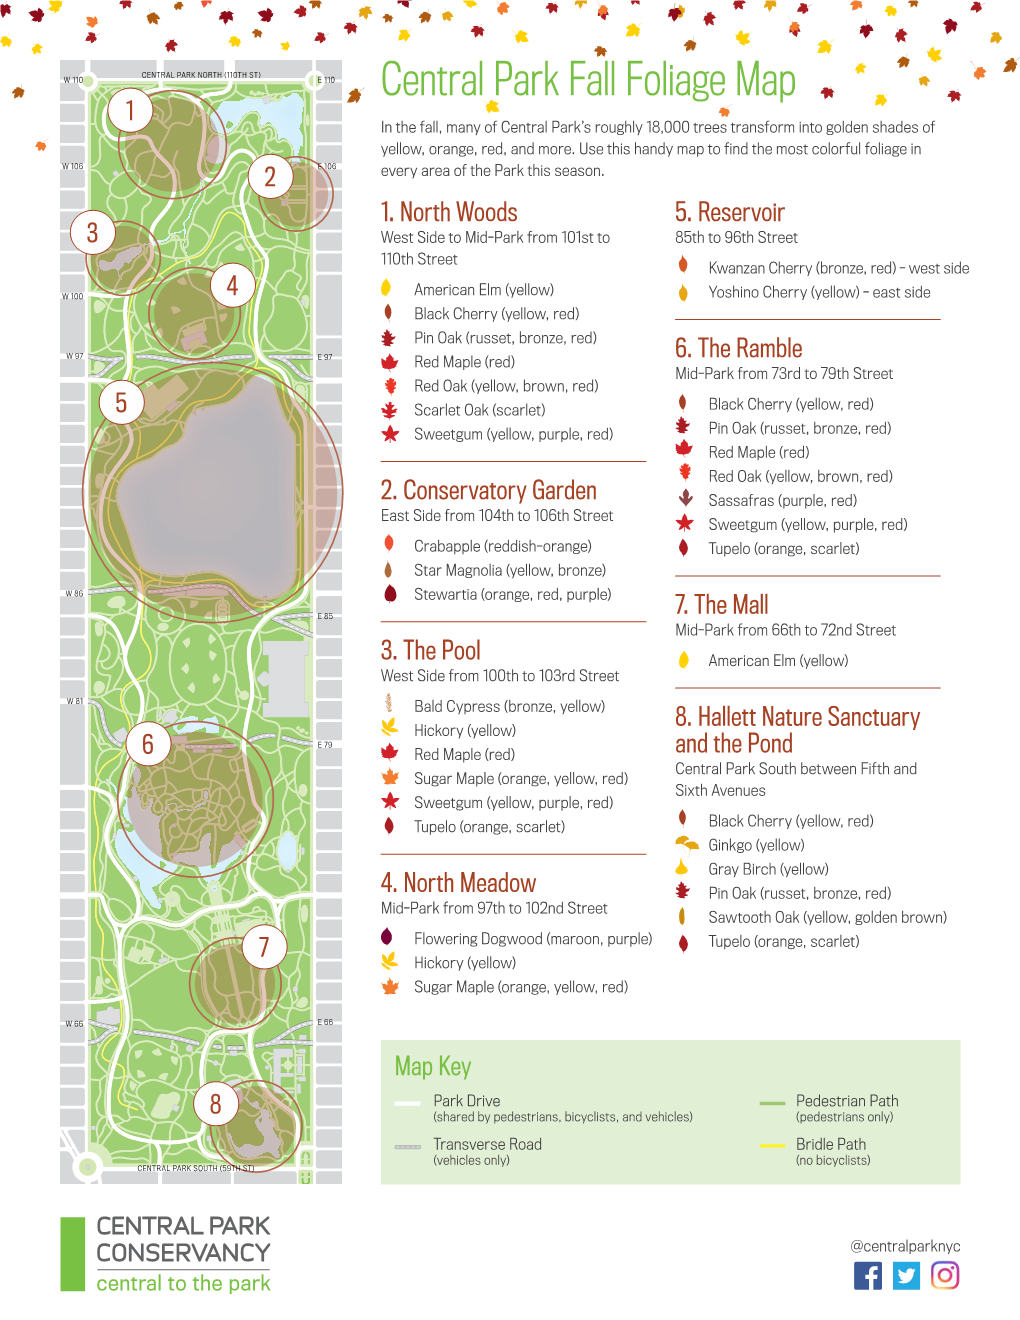 Fall Foliage Map 1 in the Fall, Many of Central Park’S Roughly 18,000 Trees Transform Into Golden Shades of Yellow, Orange, Red, and More